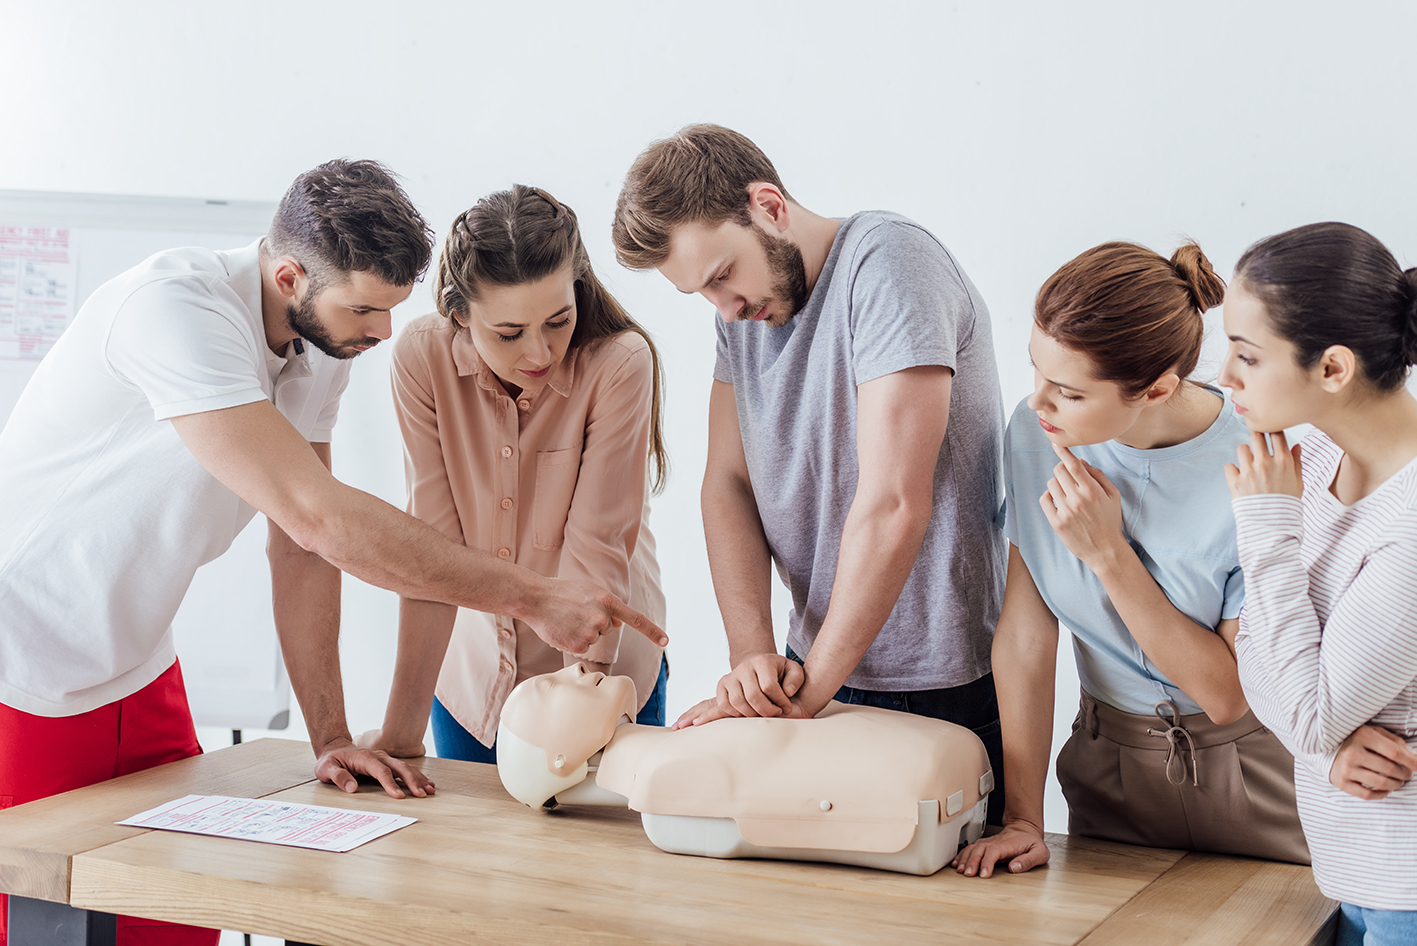 group-of-people-with-instructor-performing-cpr-on-dummy-during-first-aid-training